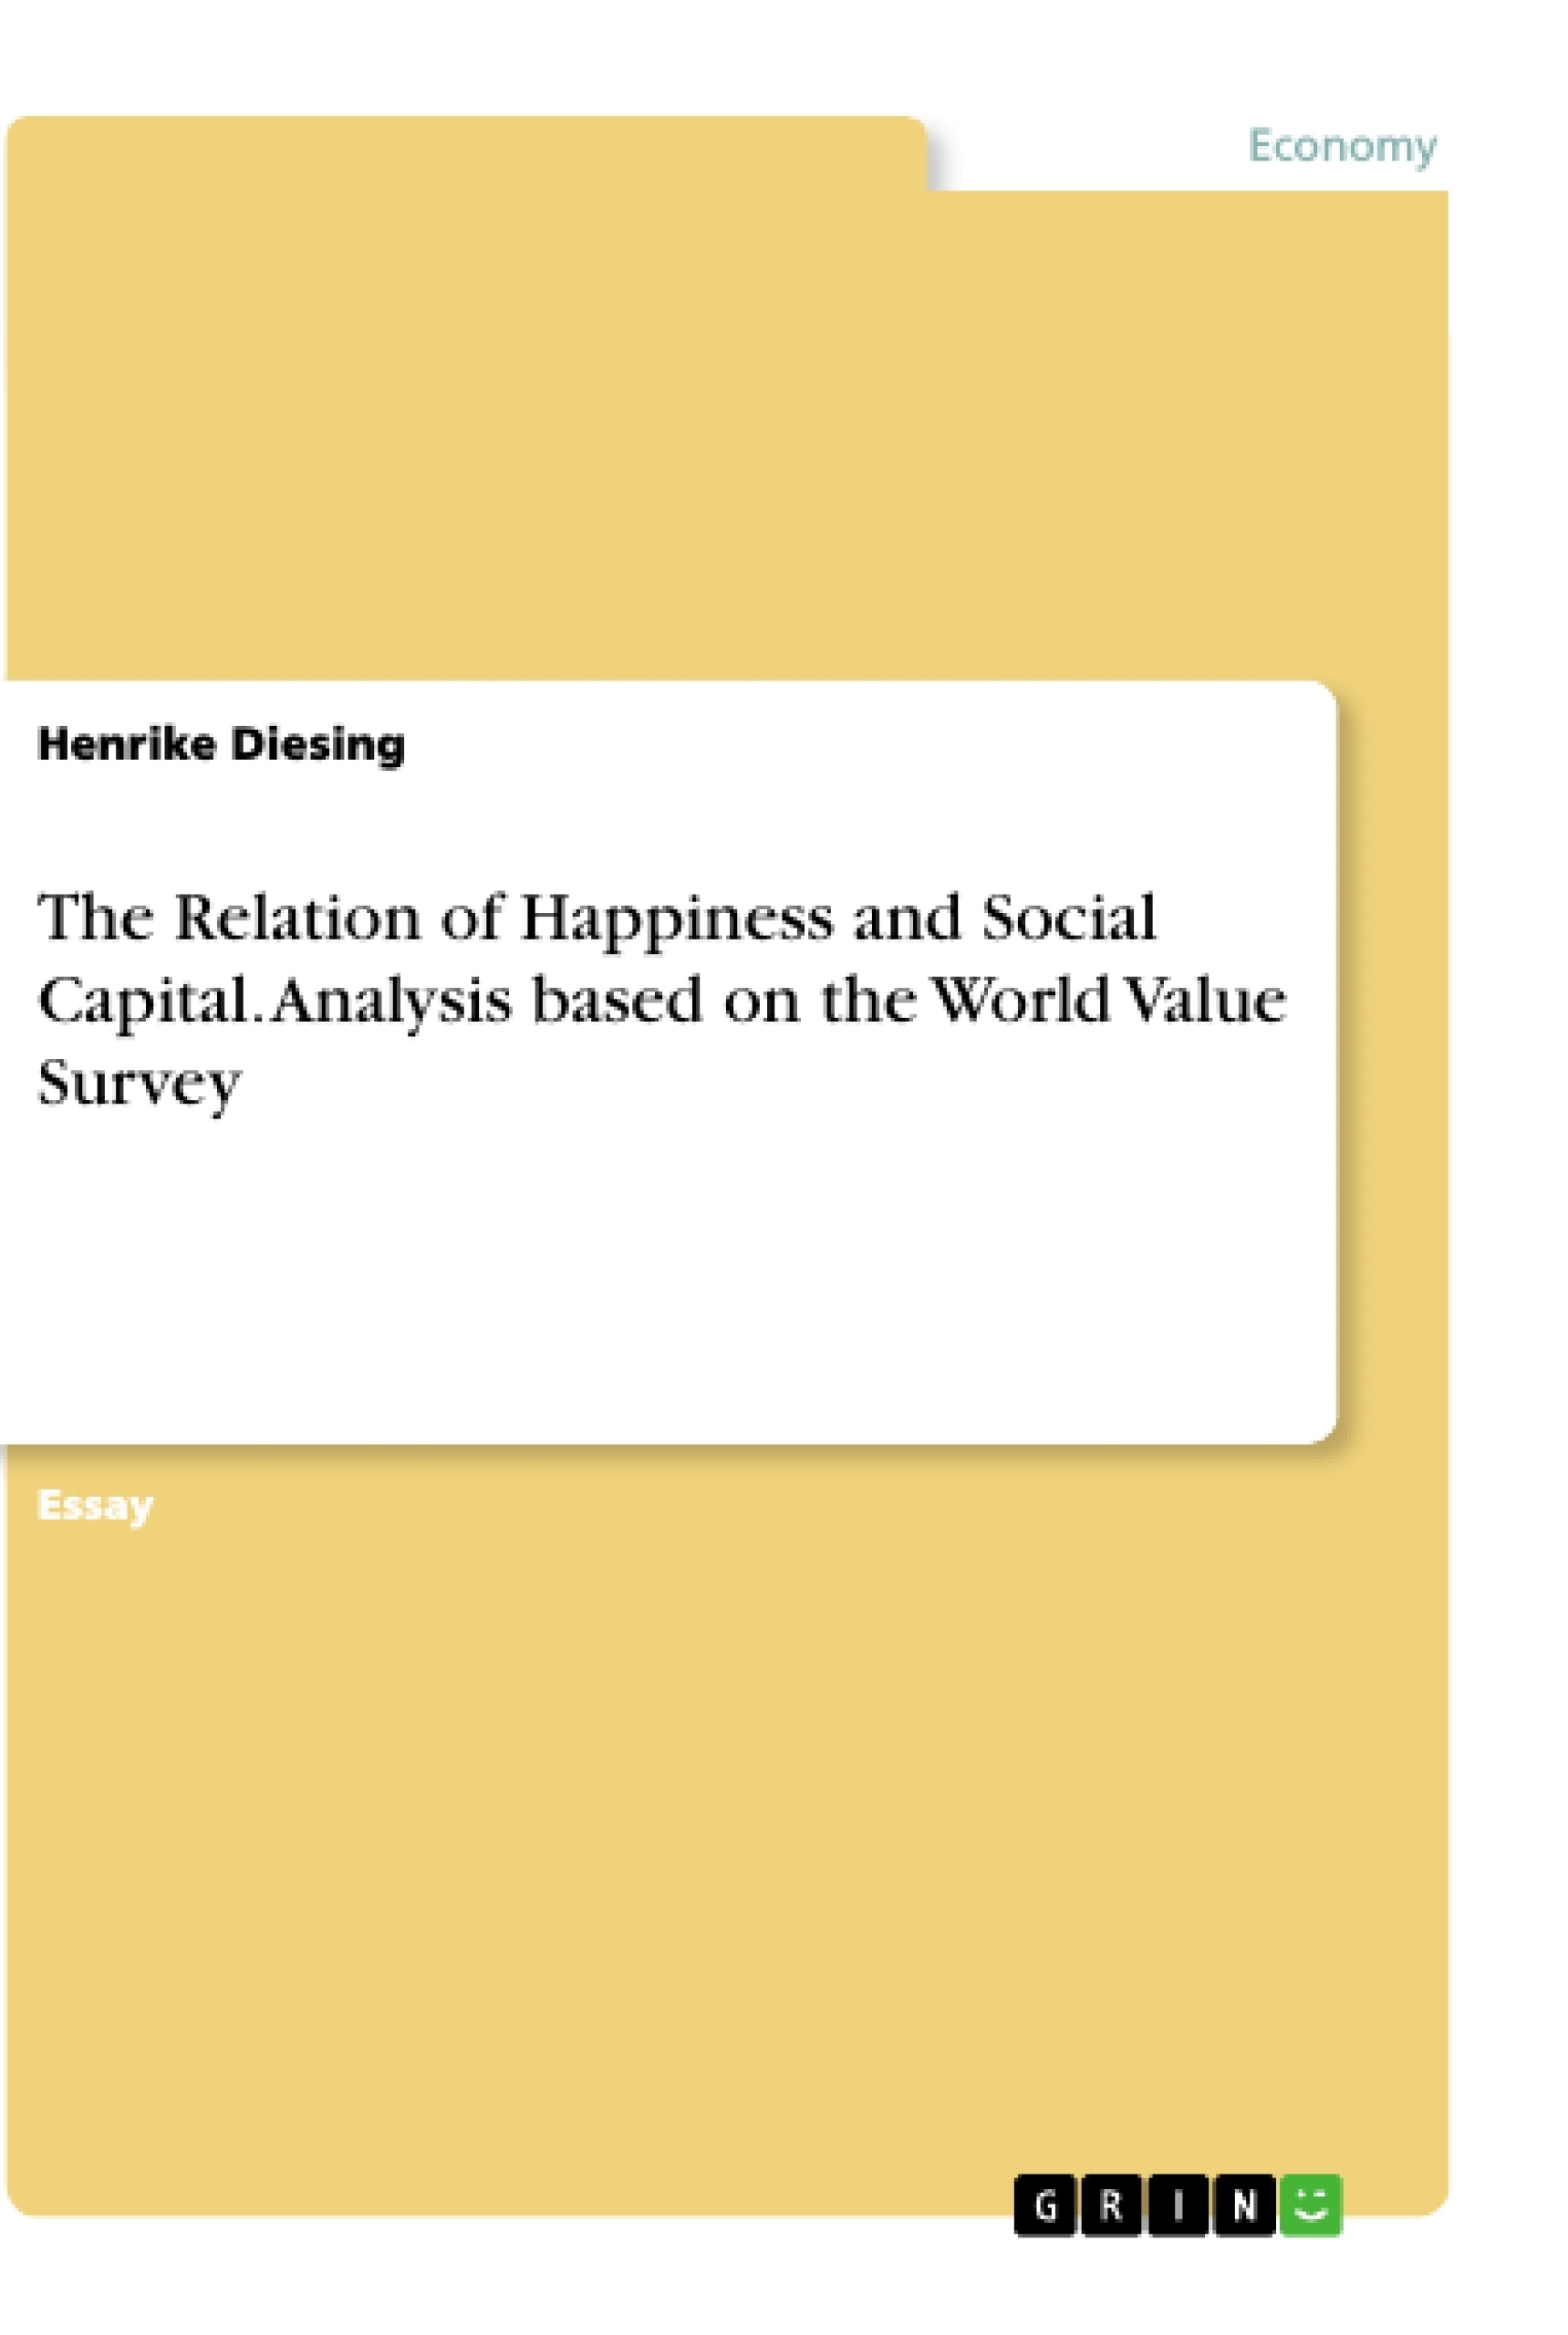 Titel: The Relation of Happiness and Social Capital. Analysis based on the World Value Survey